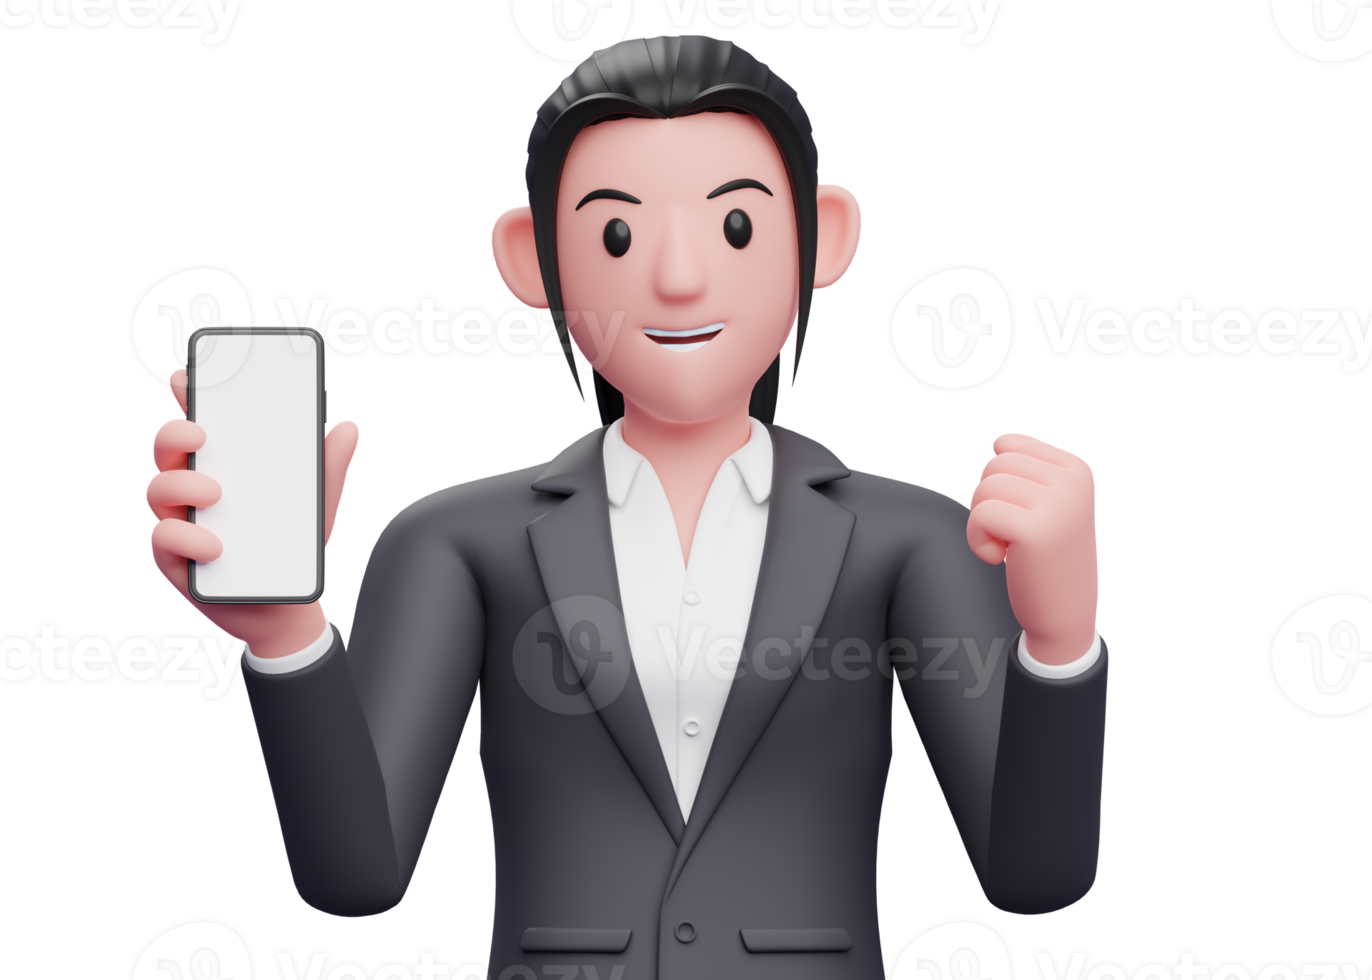 Portrait Business woman in formal suit holding phone and celebrating, 3d render close up girl character png